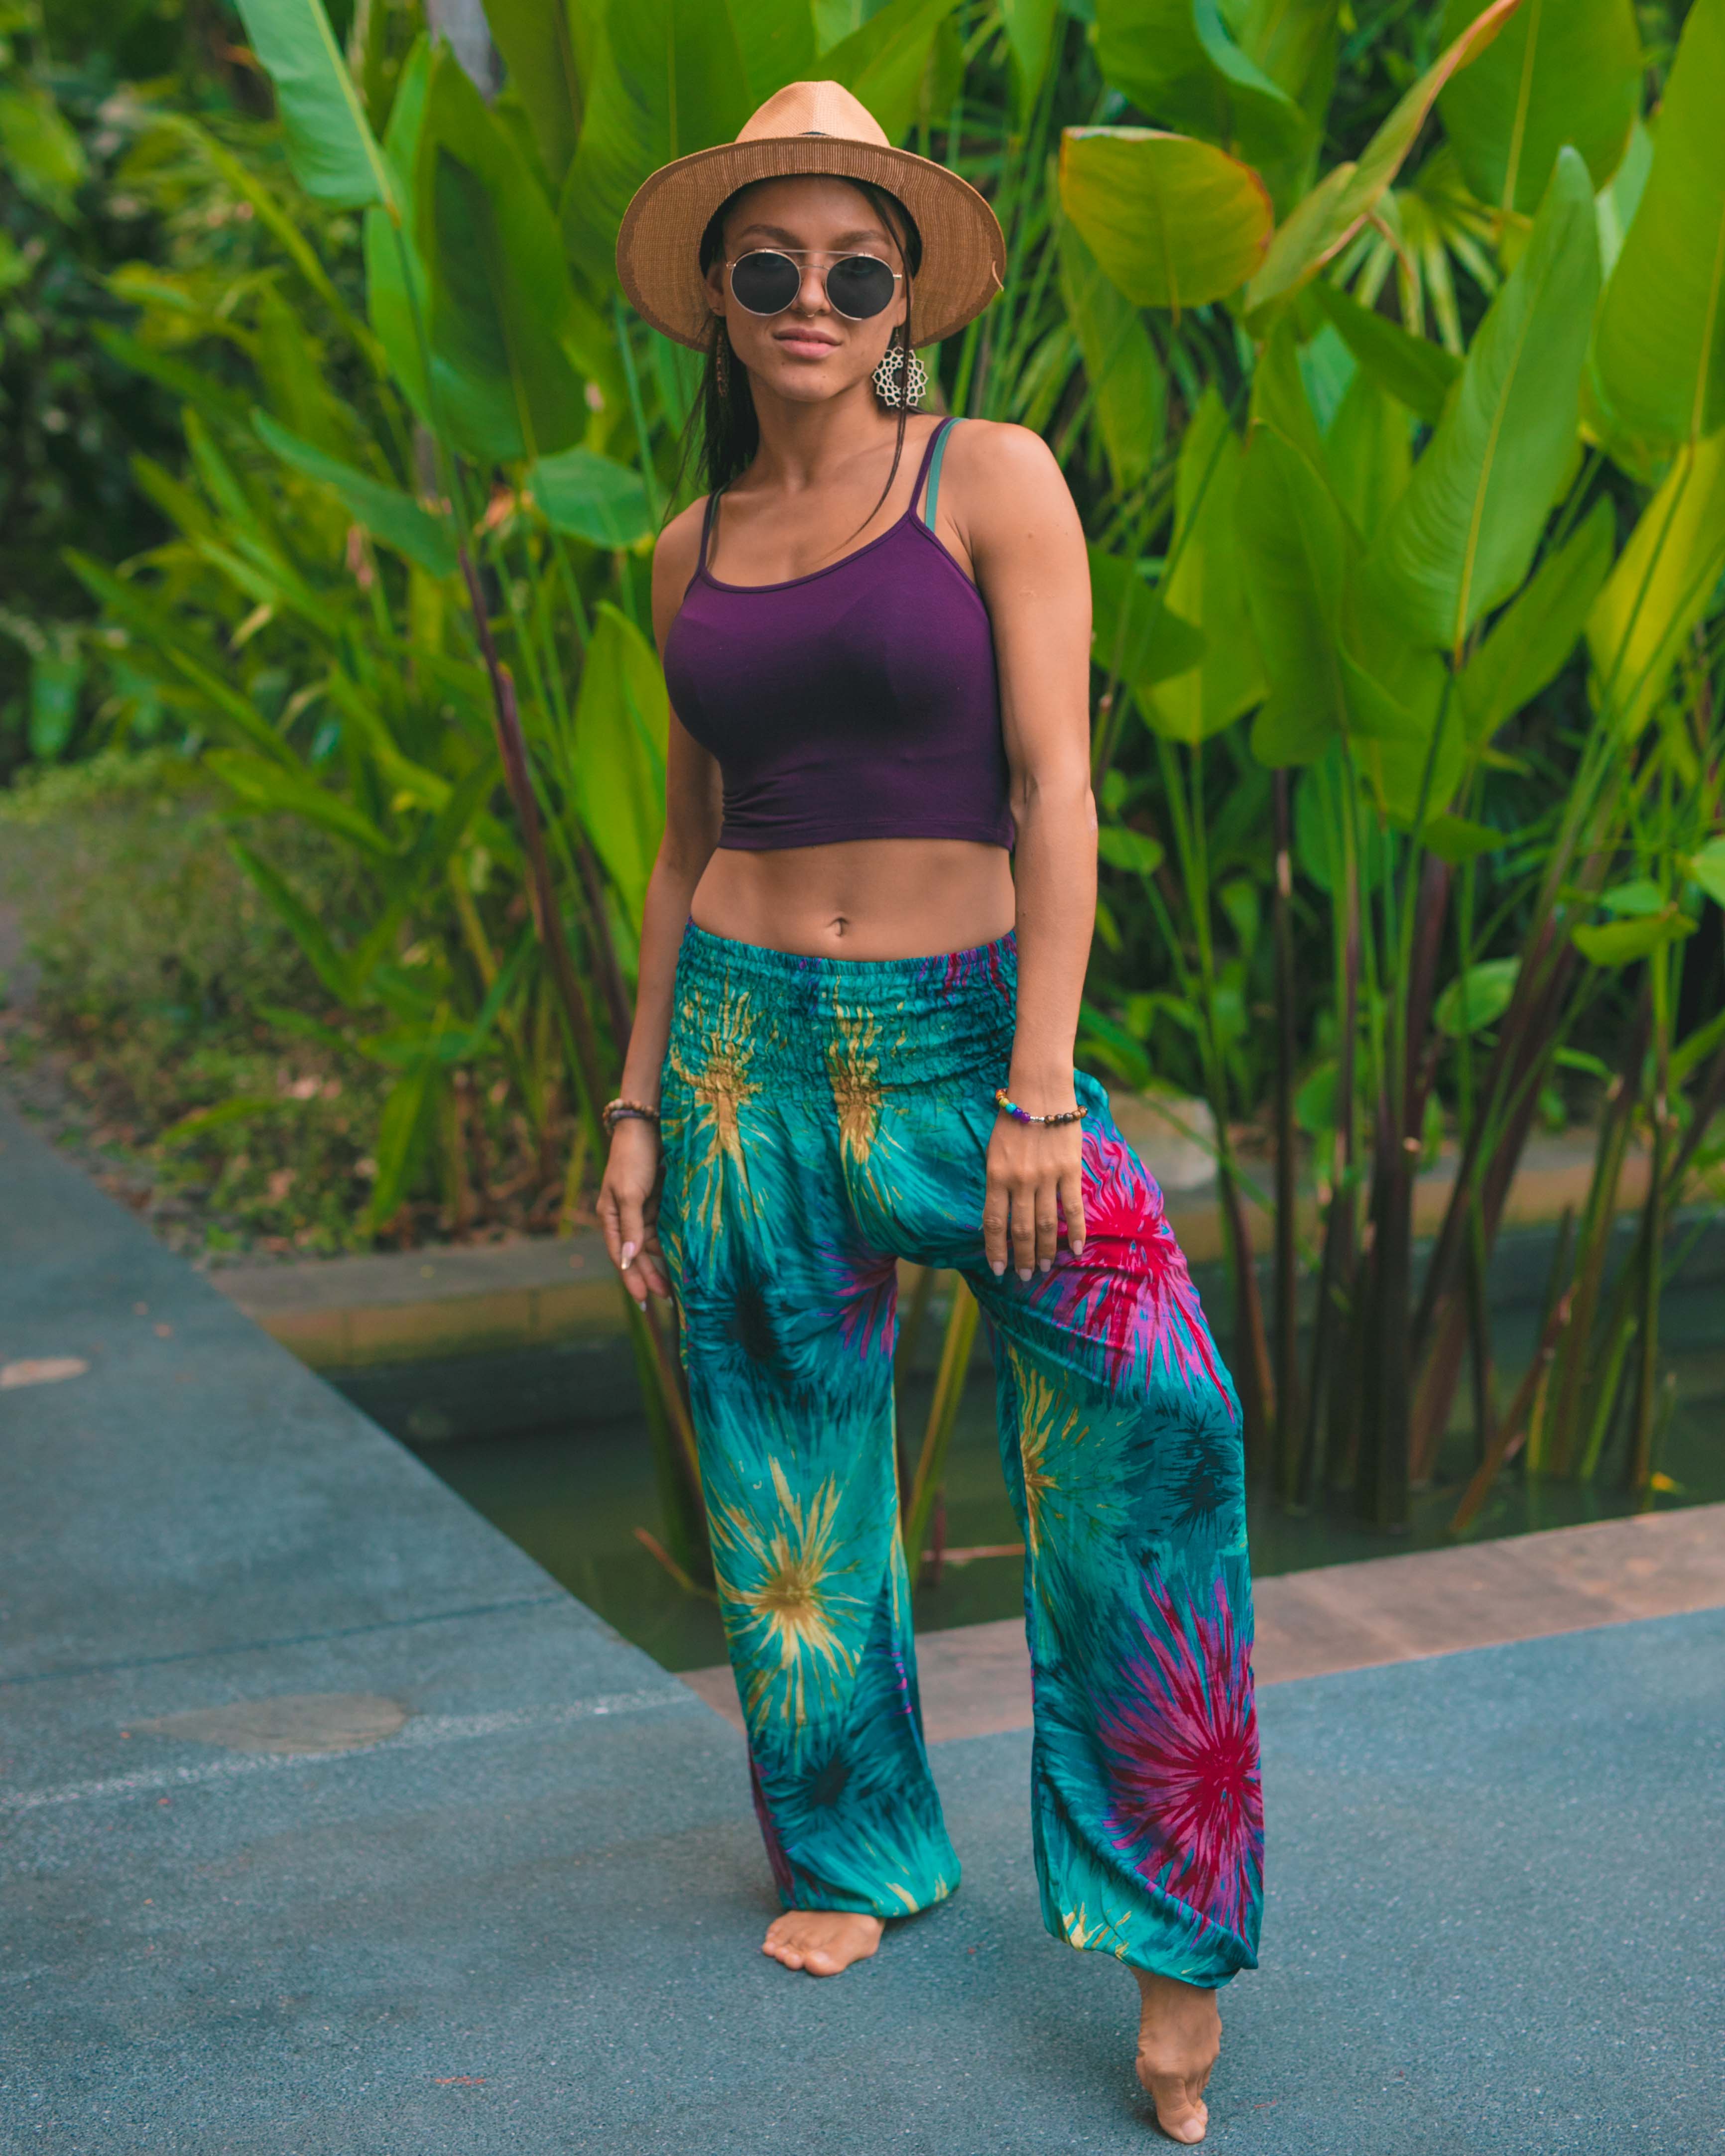 Harem Pants - Buy Today Elephant Pants Jewelry And Bohemian Clothes Handmade In Thailand Help To Save The Elephants FairTrade And Vegan